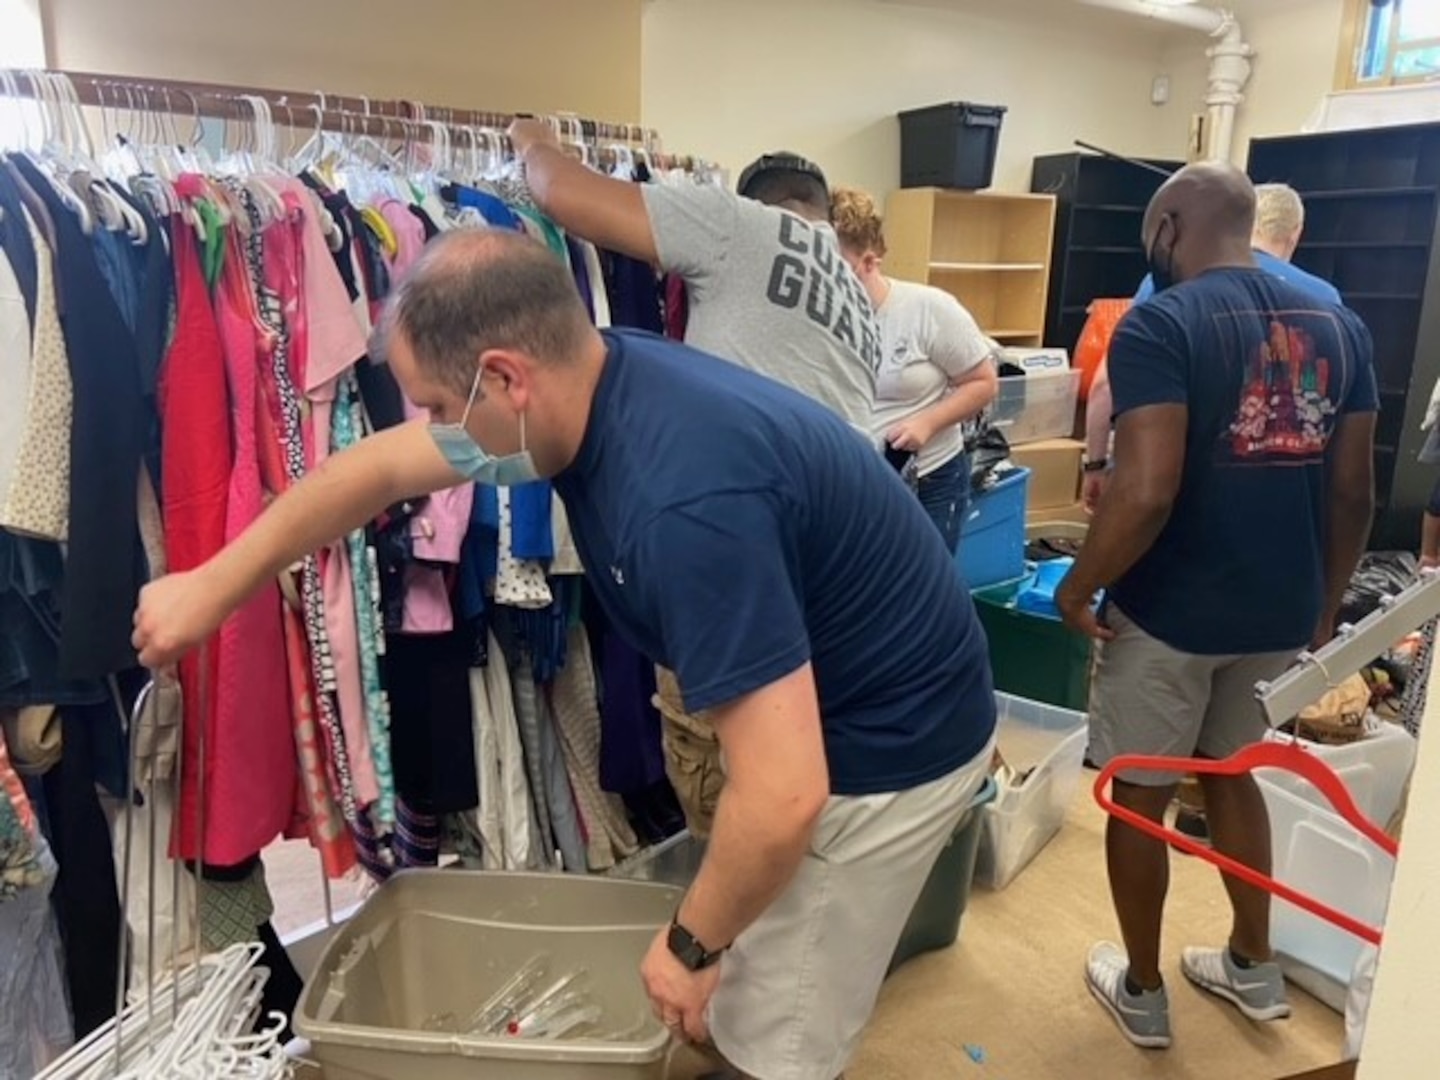 Coast Guard volunteers participate in Feds Feed Families while helping sort clothes at Bread for the City on June 29. The clothes will be made available for free to the needy in the community. Photo by Kyah Campbell, volunteer coordinator, Bread for the City, SE.